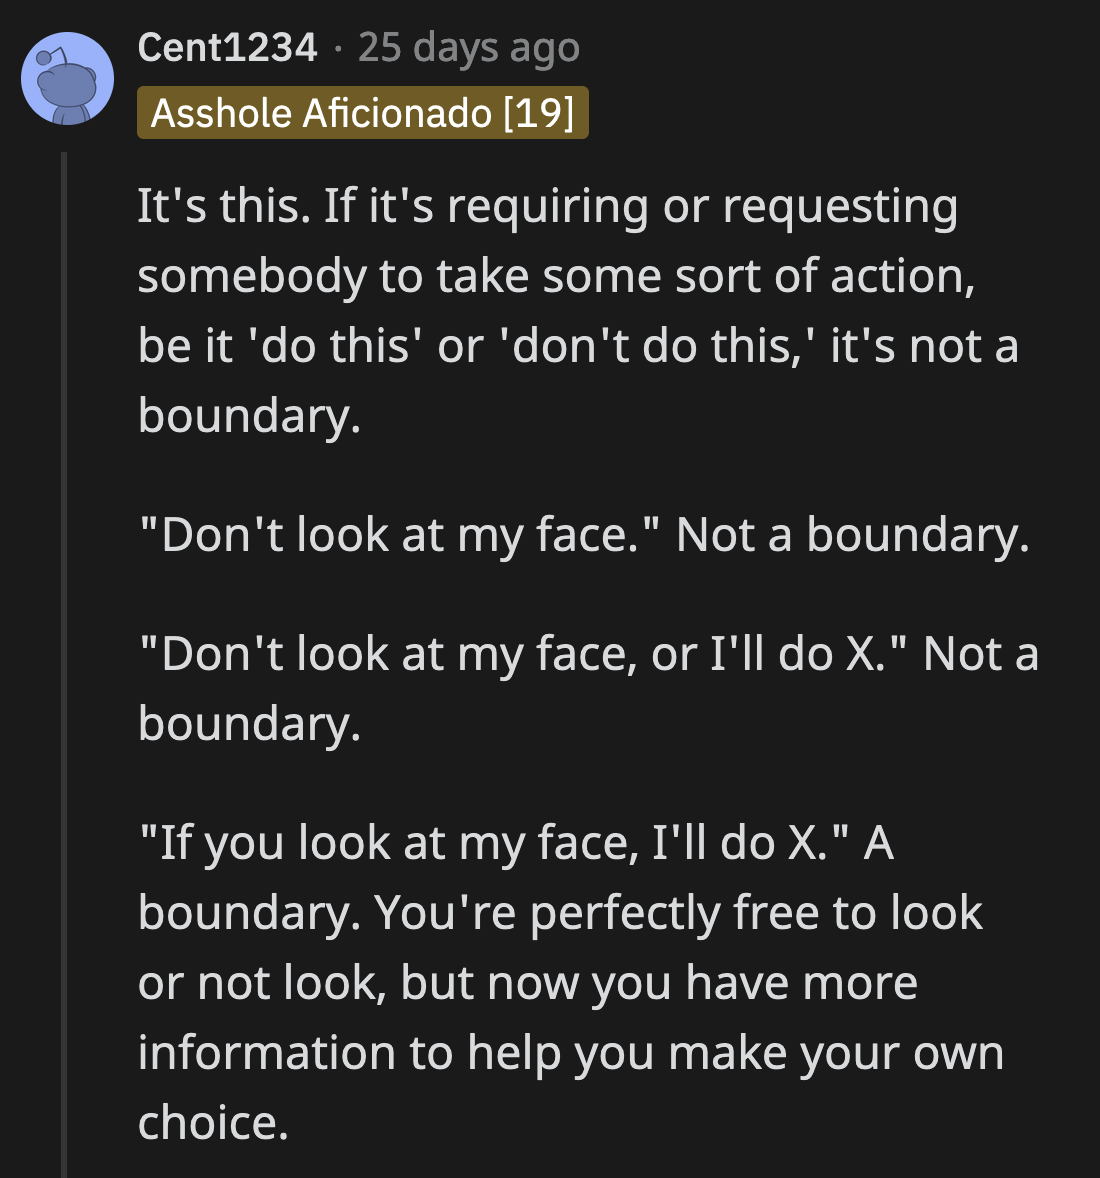 Another commenter explained how J's request (command) could have been an actual boundary.